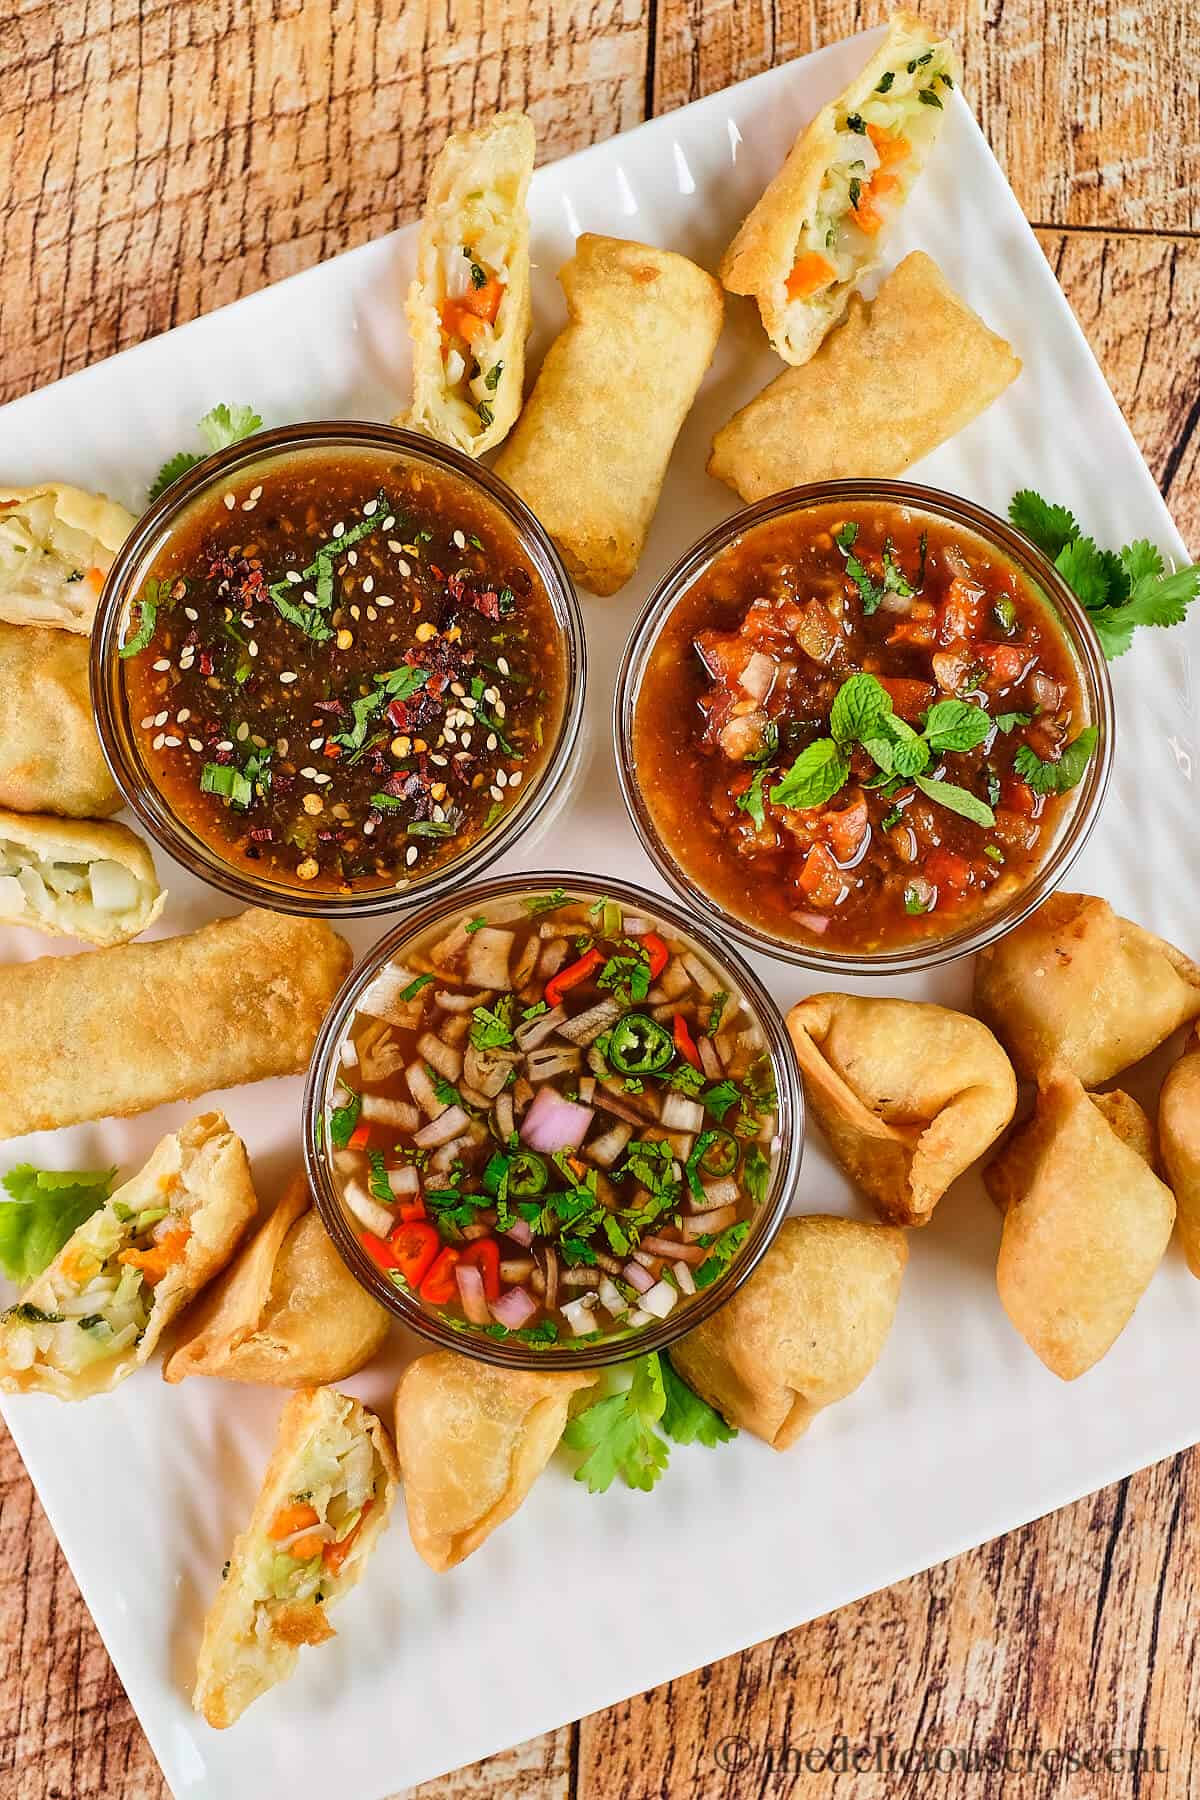 Tamarind dipping sauces served with appetizers.